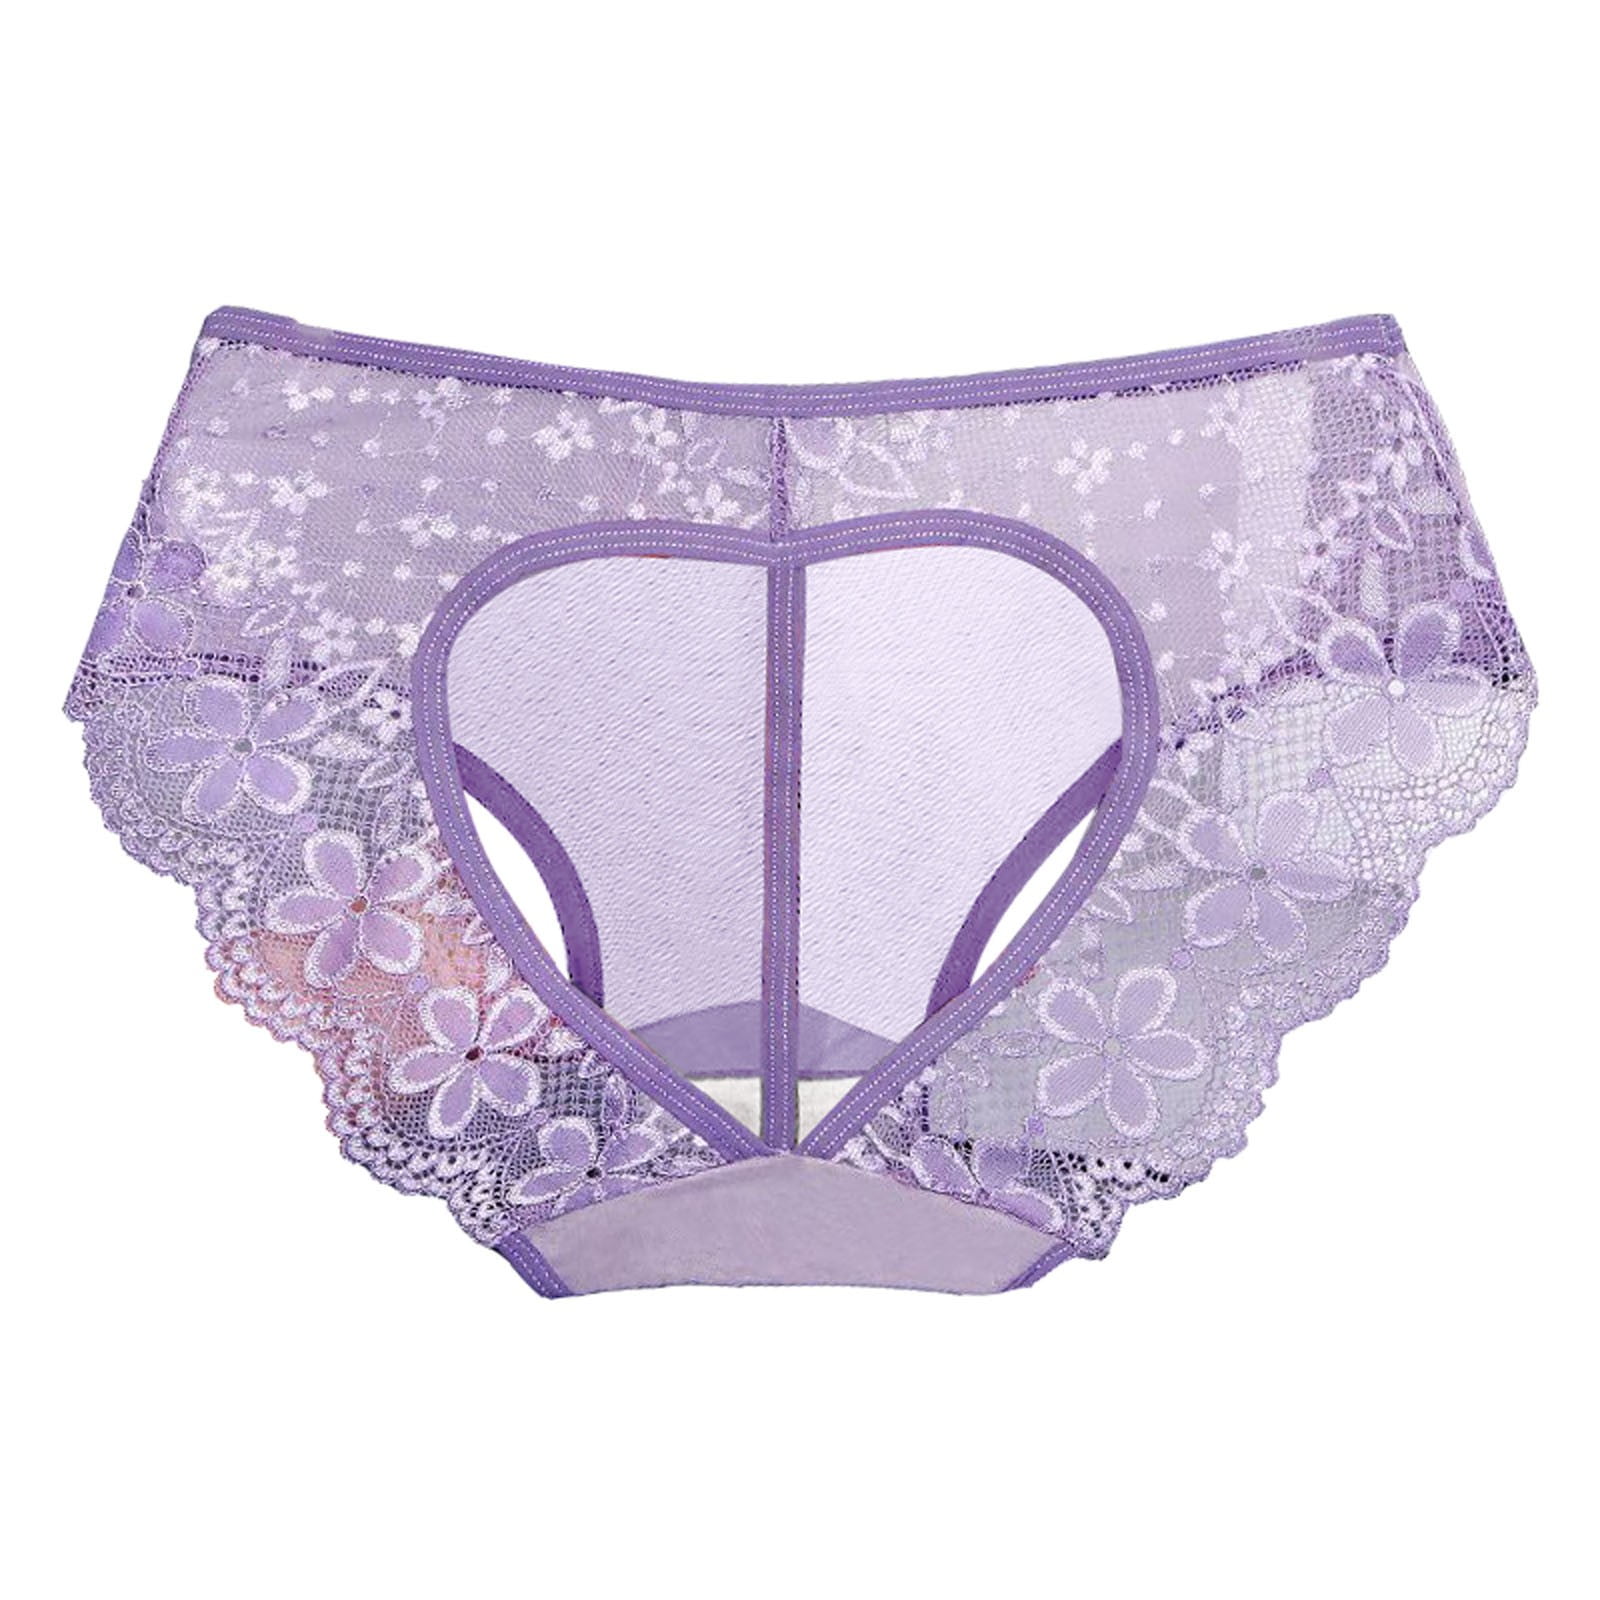 Buy Lingerie Paradise Antibacterial Underwear for Ladies, Panties for Women  Pack of 2, Hipsters for Women, mid Waist Panty Size:  S,M,L,XL,2XL(Multicolor Variations) (L, Purple) at